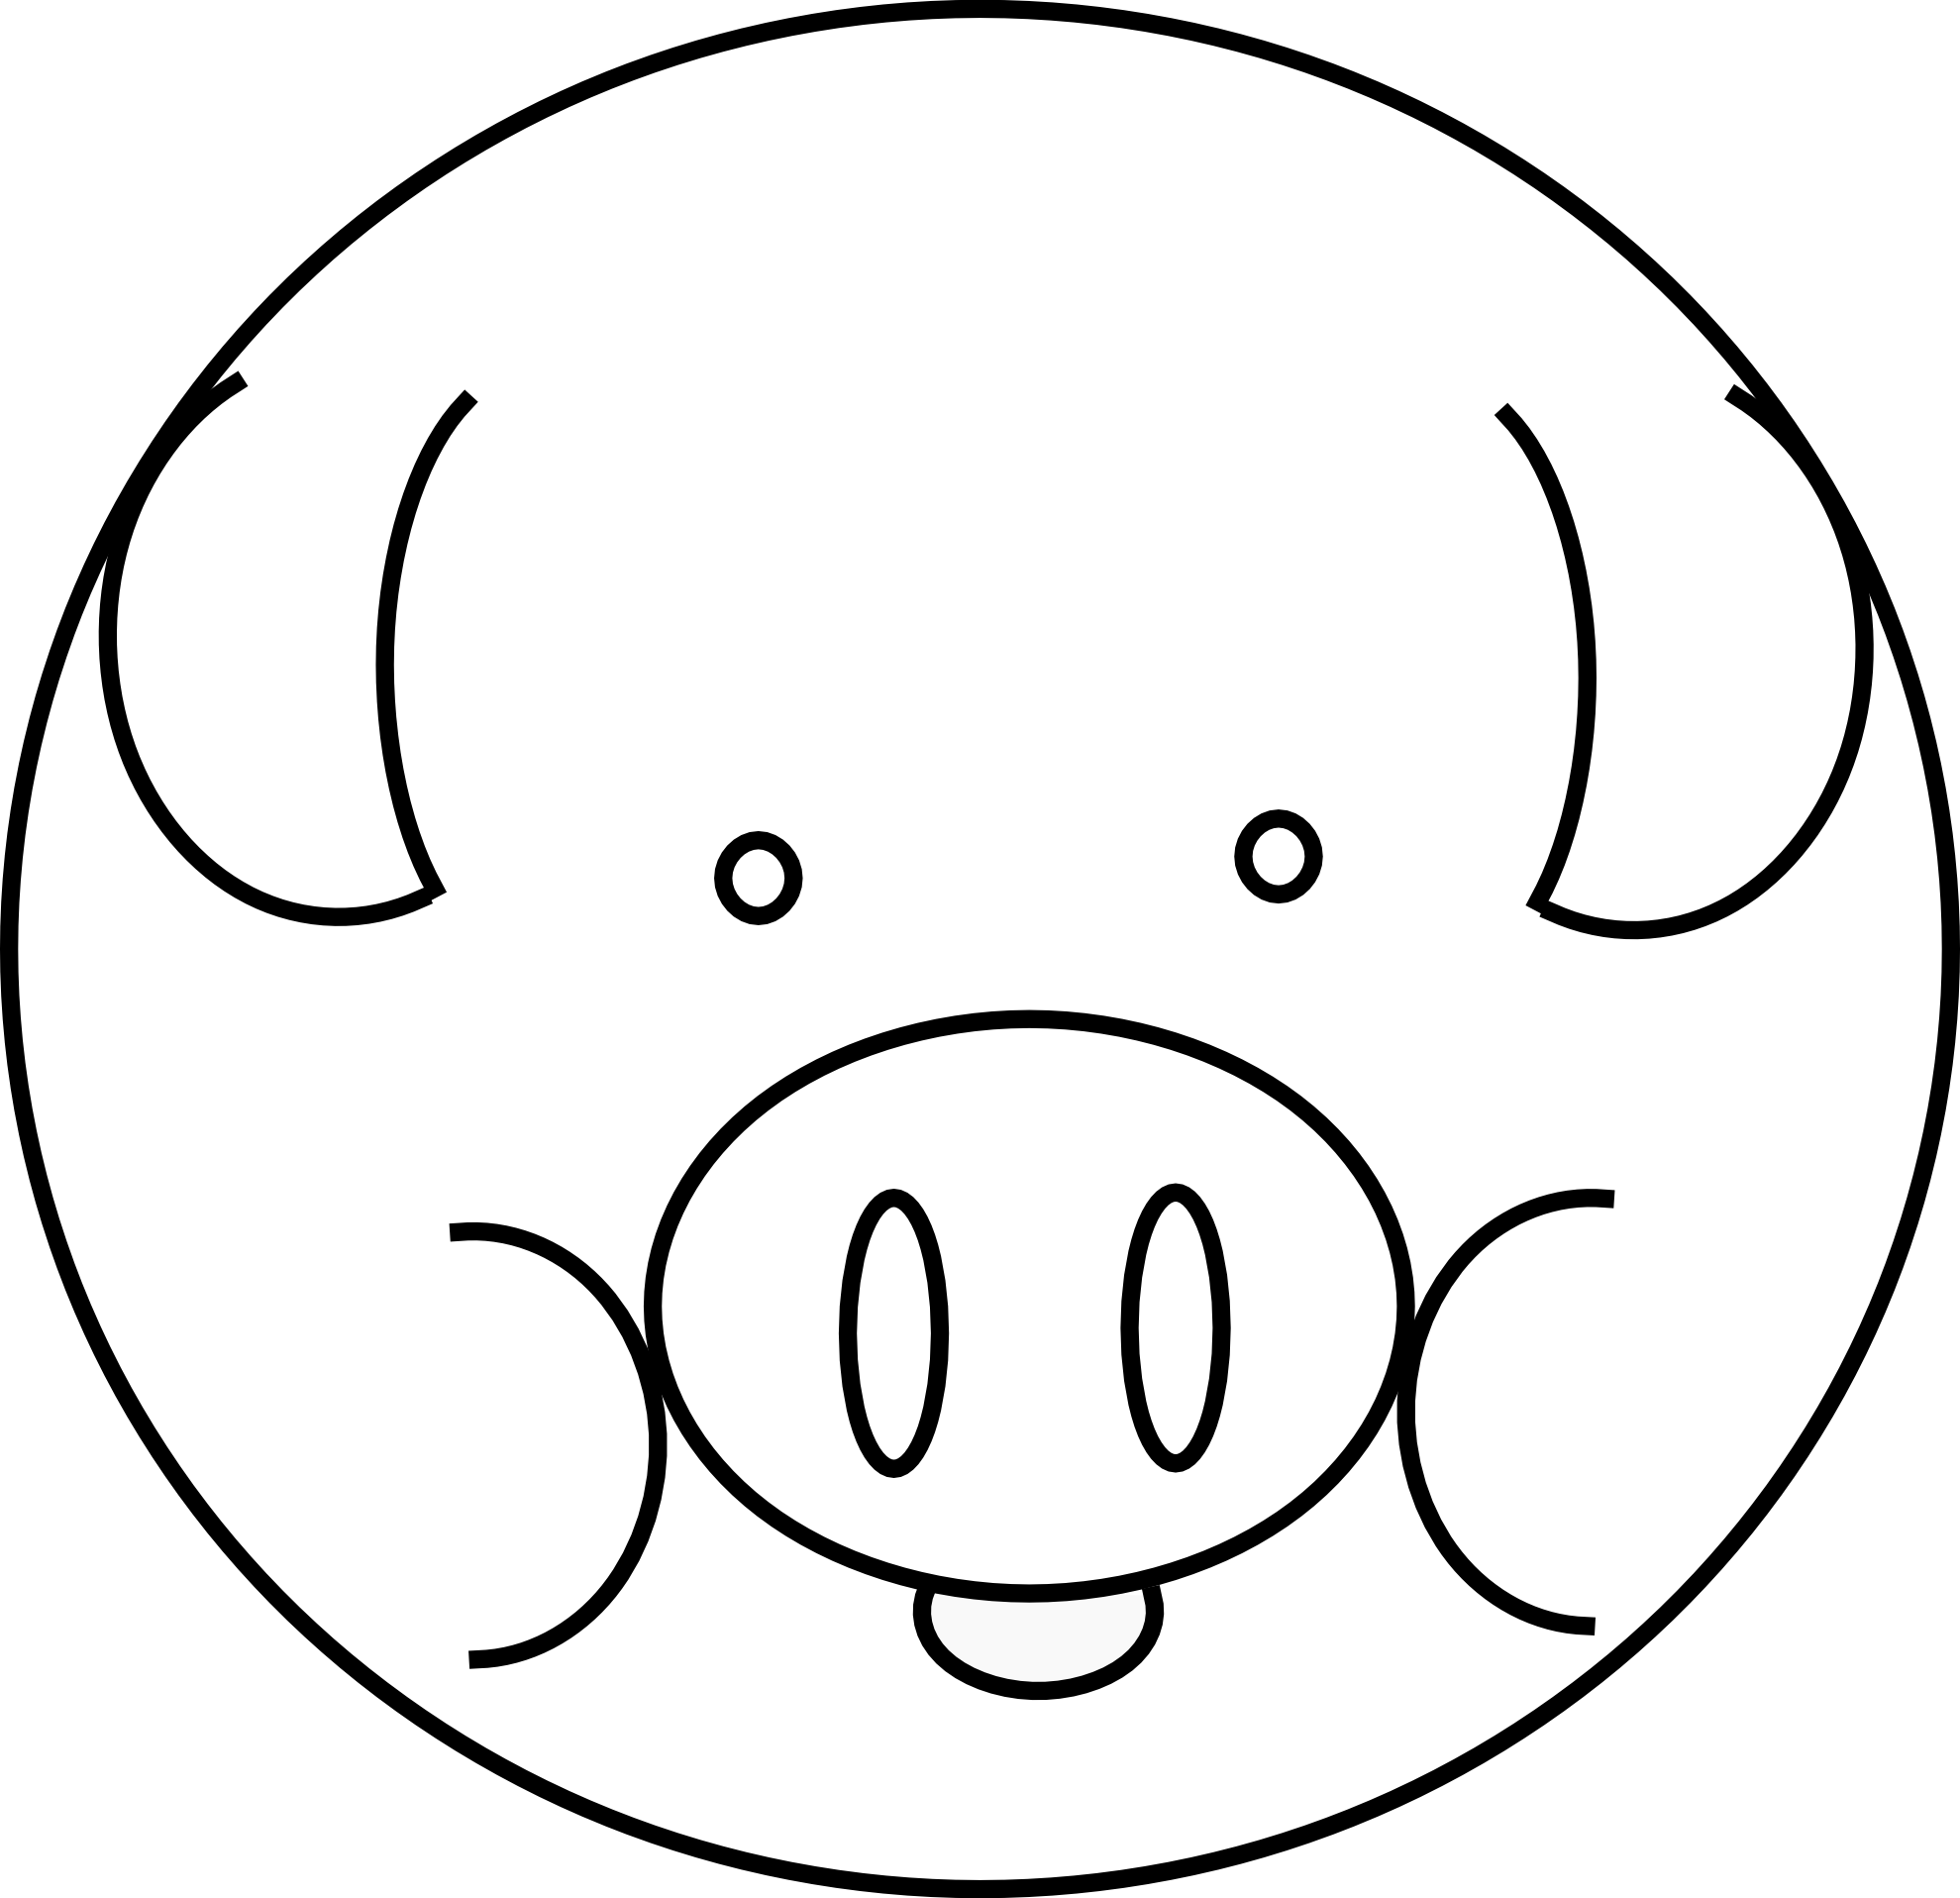 Pig Clip Art Black And White - Pig Icon (1979x1916)